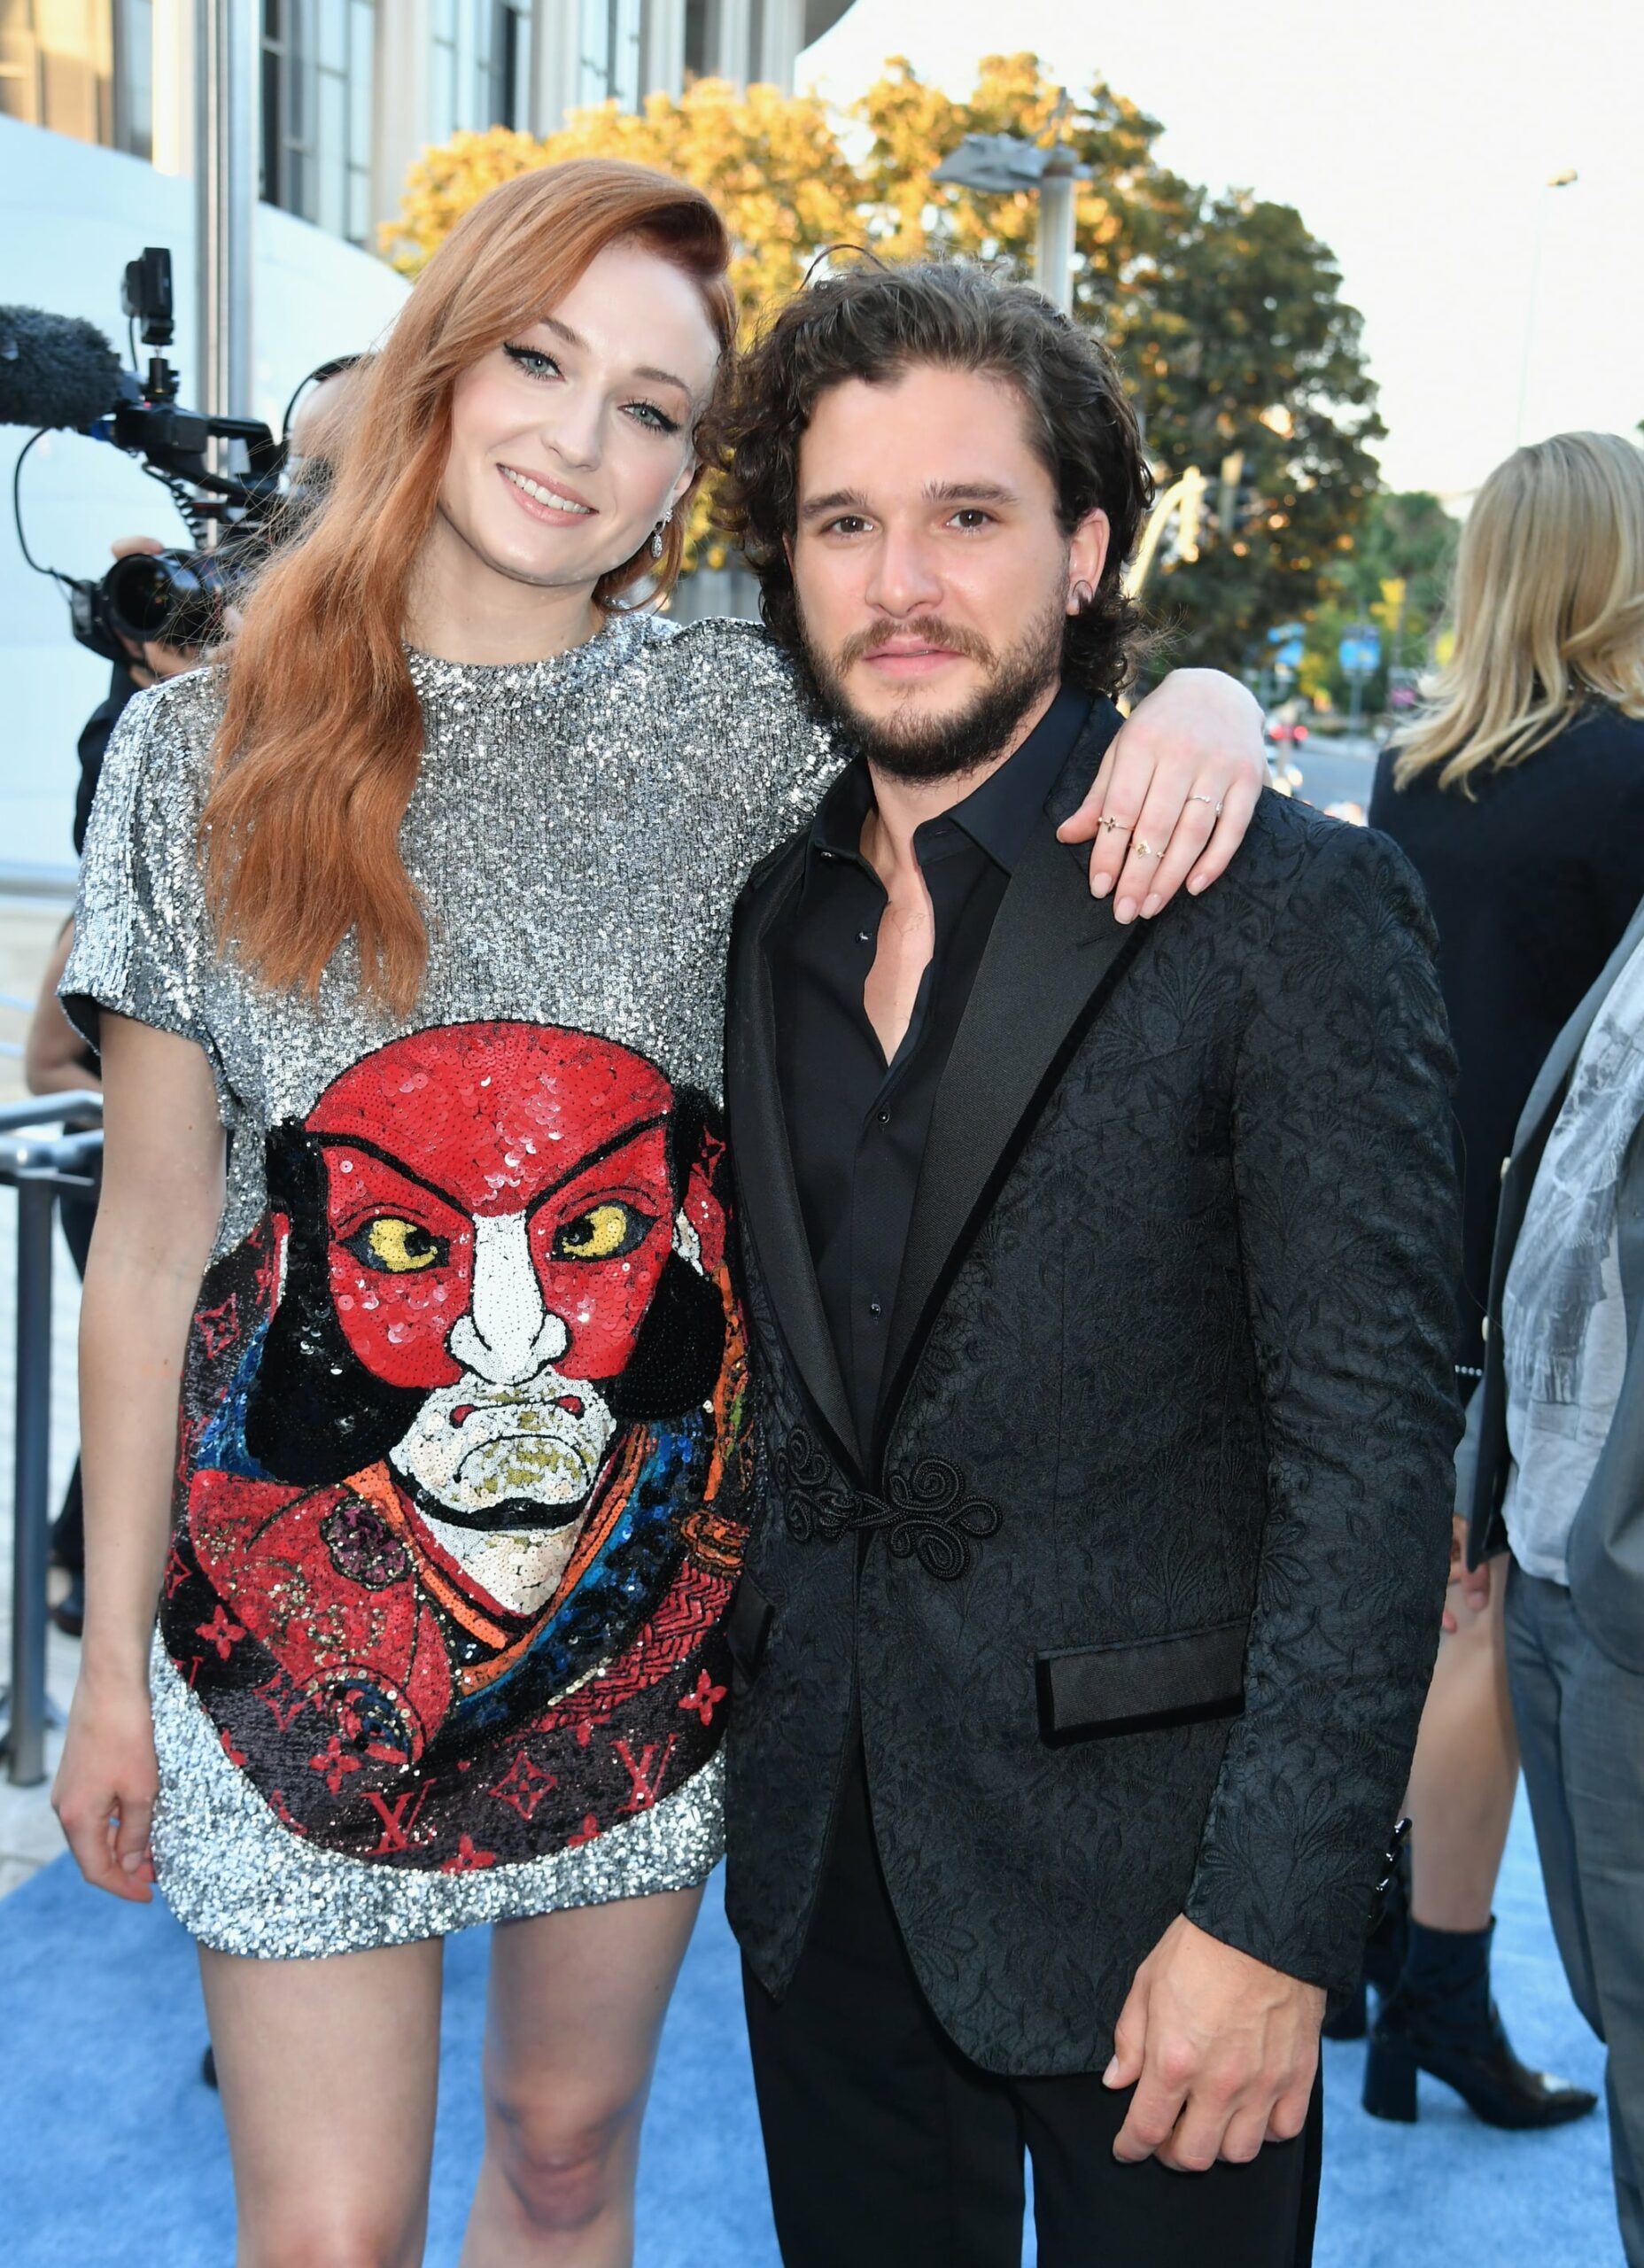 LOS ANGELES, CA - JULY 12: Actors Sophie Turner (L) and Kit Harrington at the Los Angeles Premiere for the seventh season of HBO